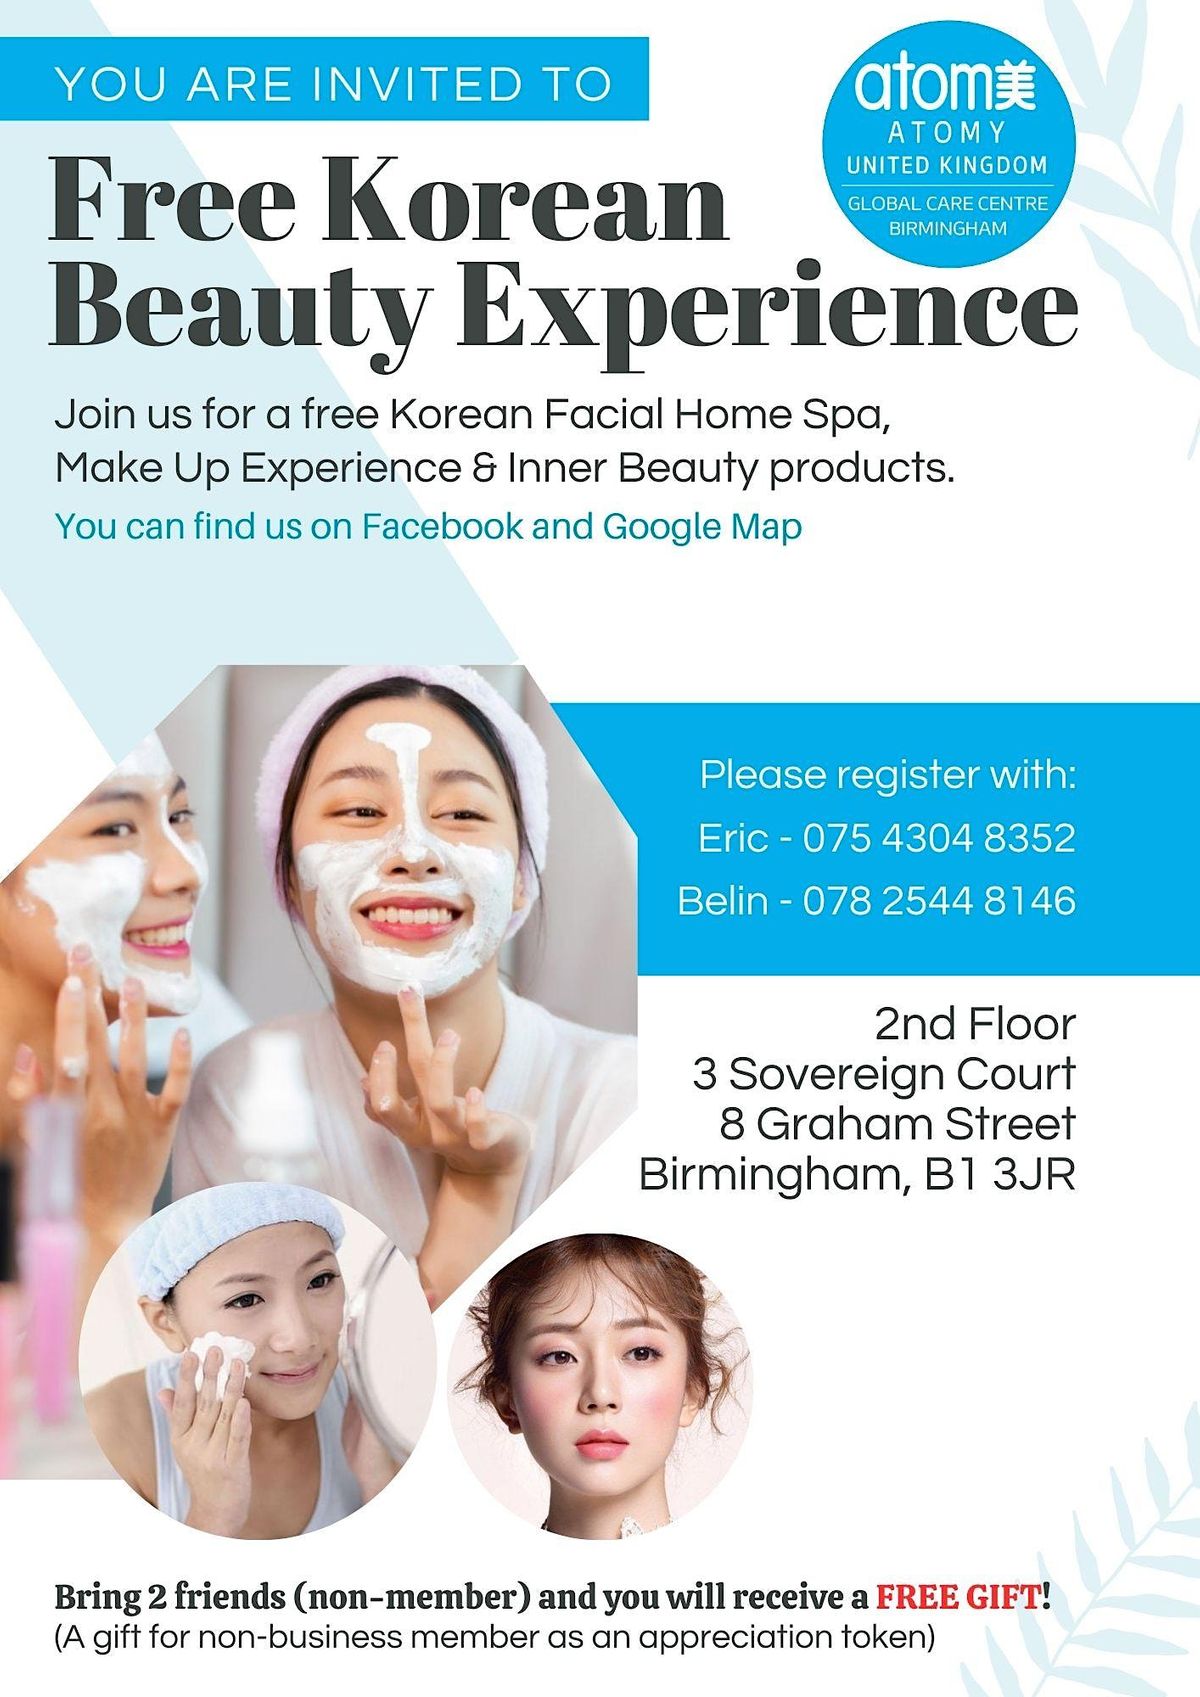 FREE Korean Facial Demo & The Inner Beauty with FREE GIFT!